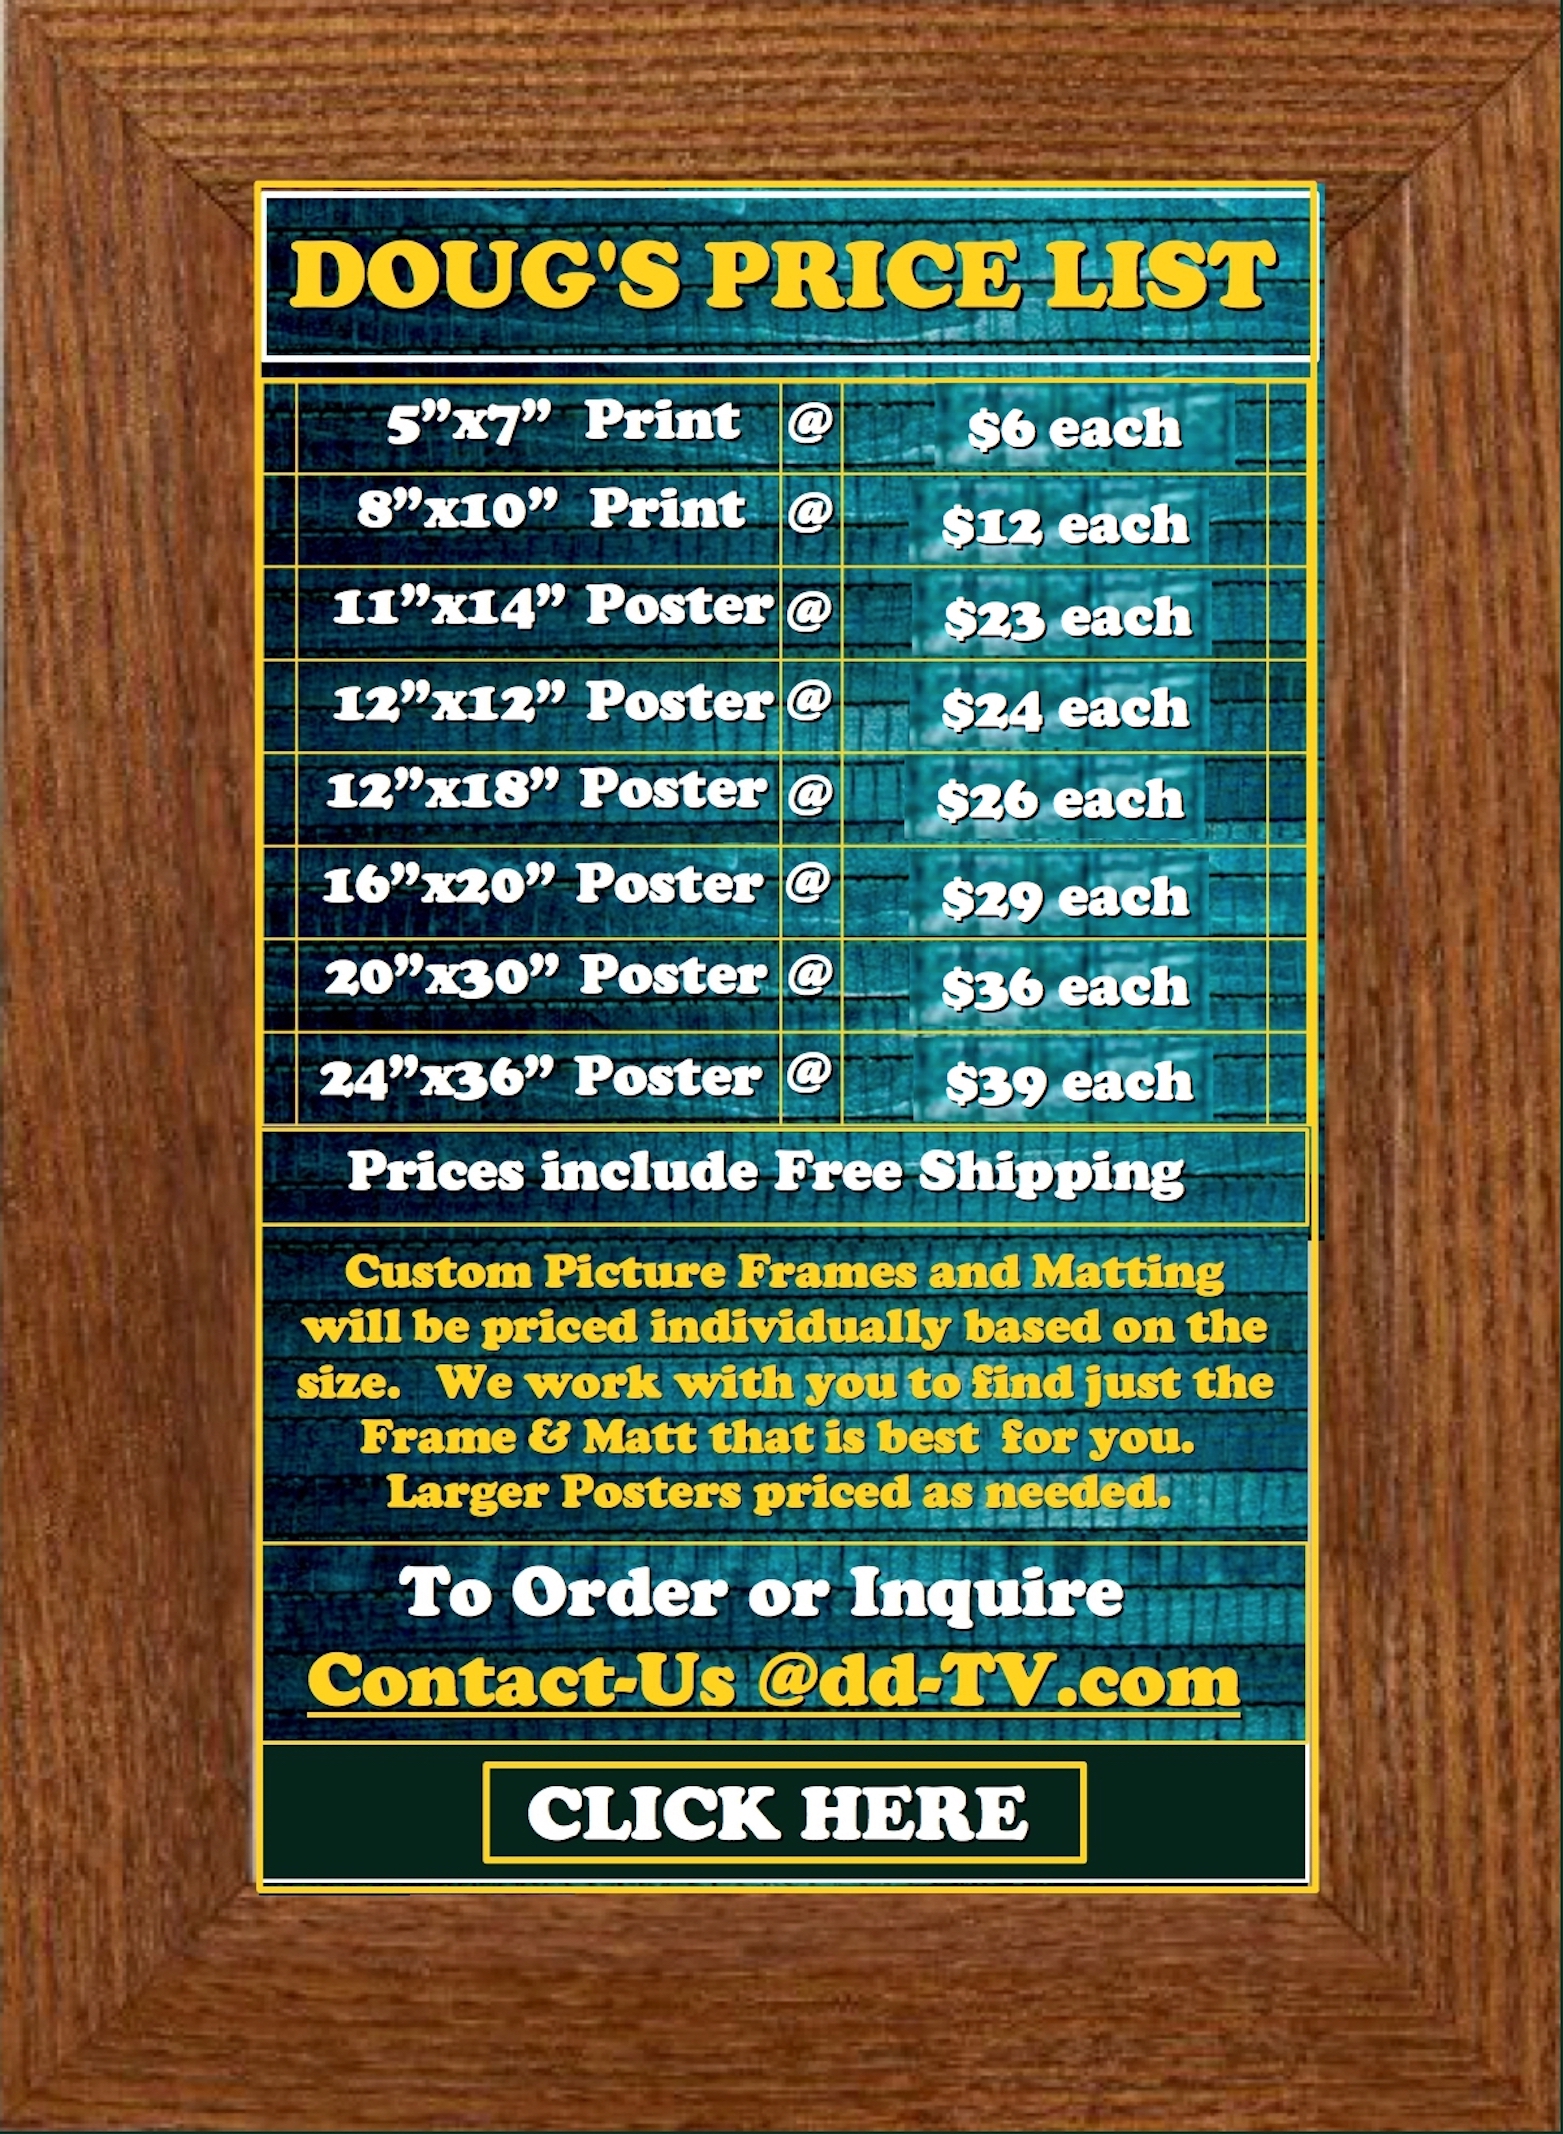 ========================================================DOUG-PICTURES-PRICE-LIST-1-22=========================================================DOUGS PICTURES FULL-PRICE-LIST========